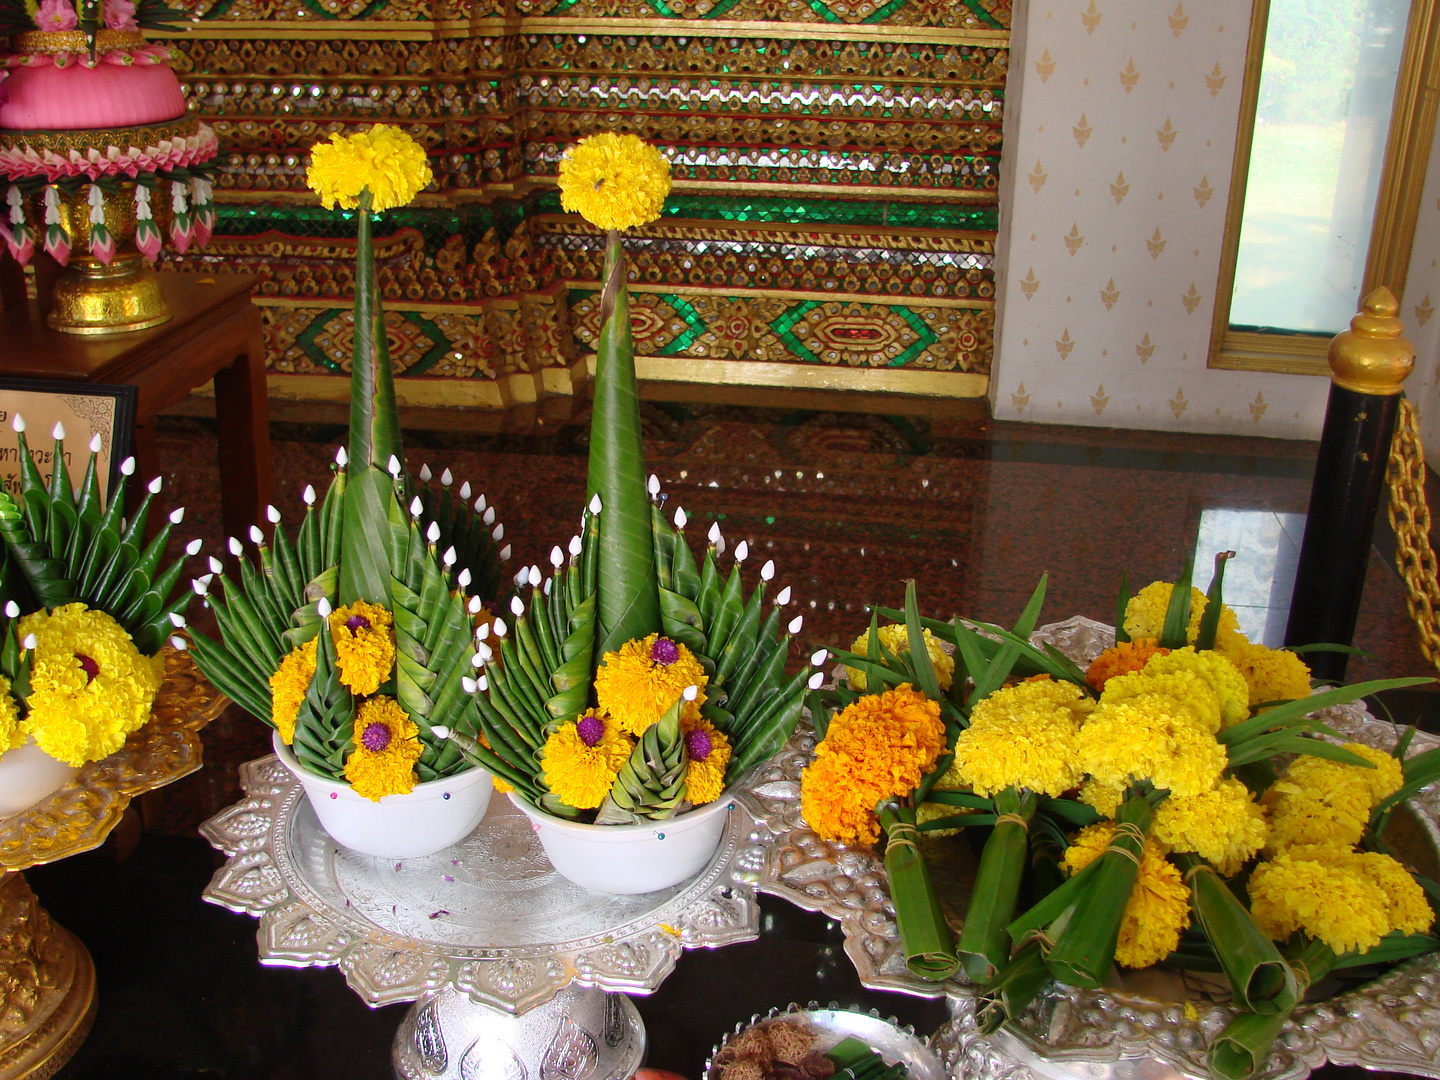 offerings to Buddha